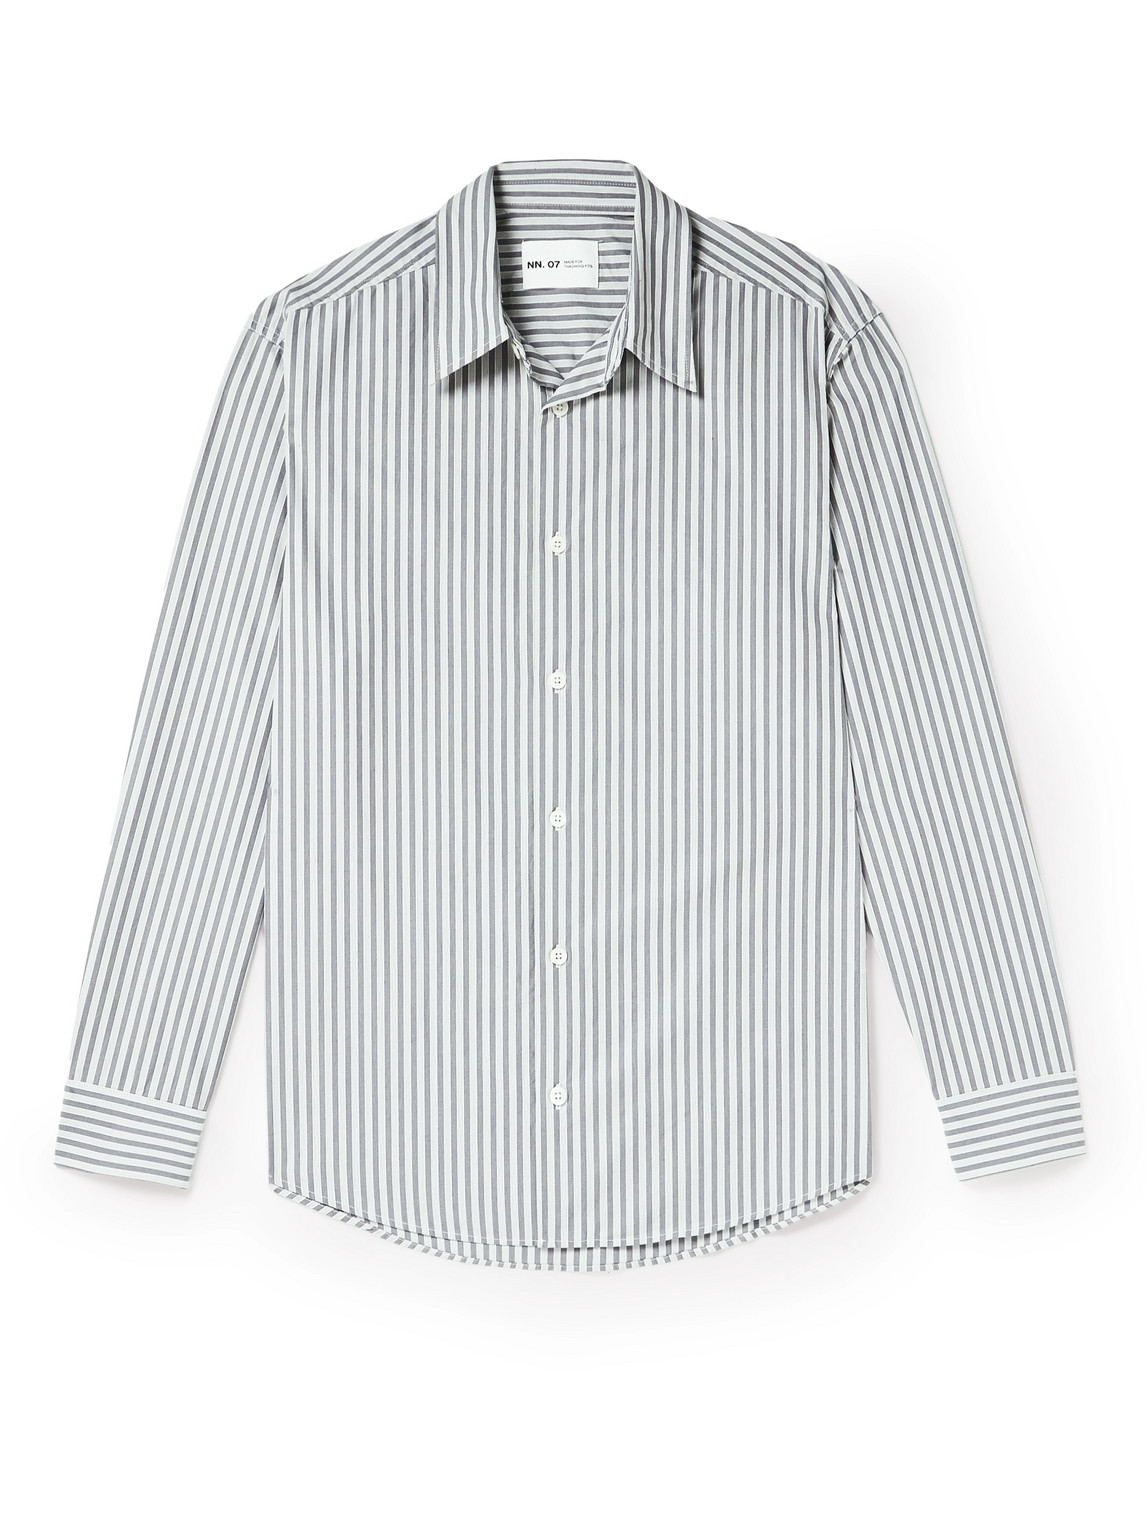 Nn07 Throwing Fits Quinsy 5973 Striped Cotton-poplin Shirt In Gray